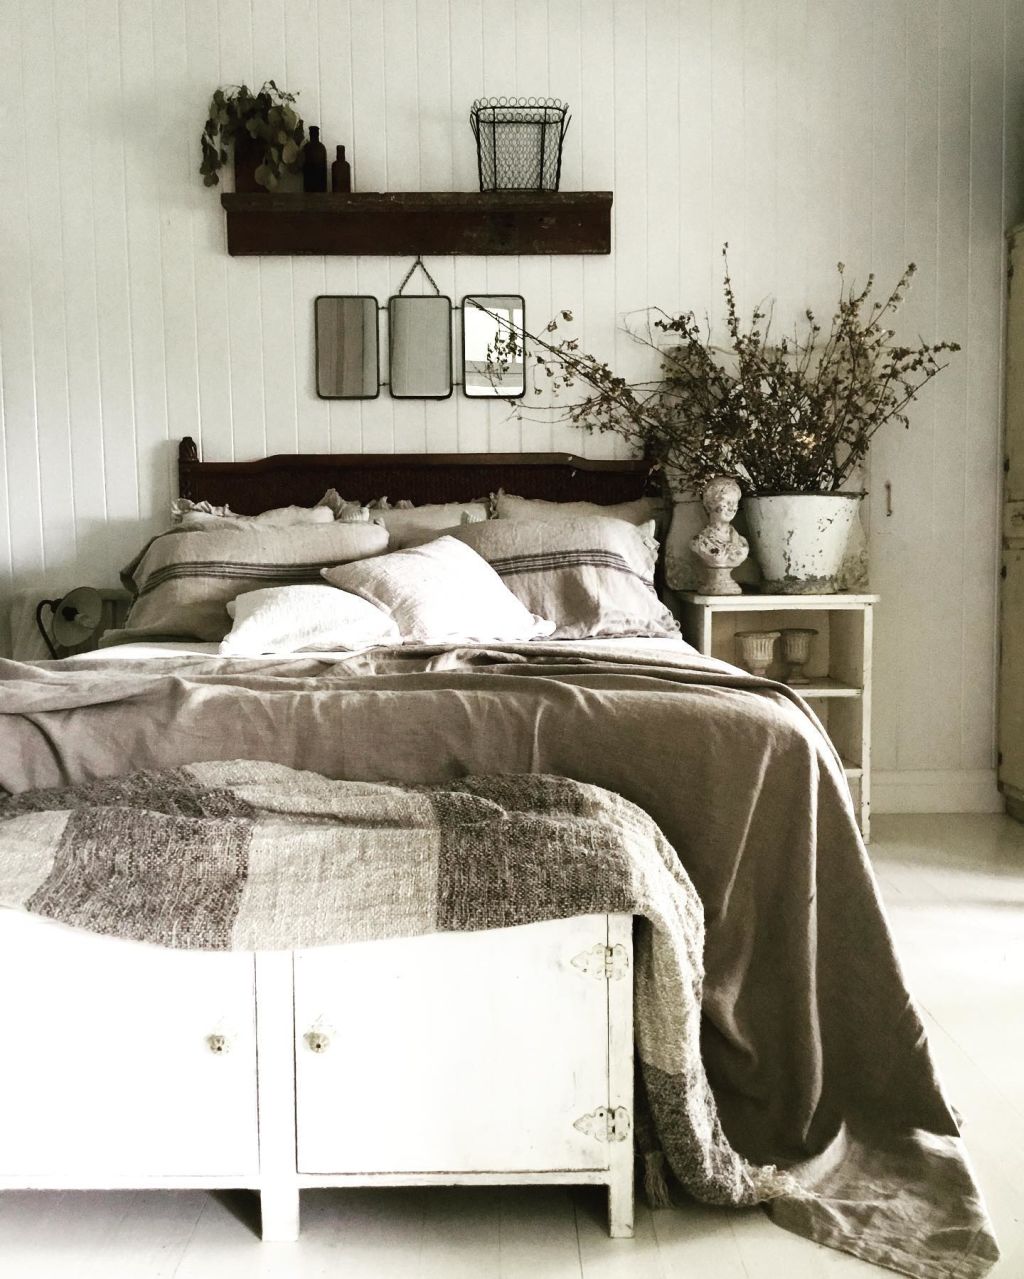 The beds are sumptuous with French linen, while bunches of fresh and dried botanicals from the cottage garden adorn the rooms. Photo: Instagram: @vintage_country_house